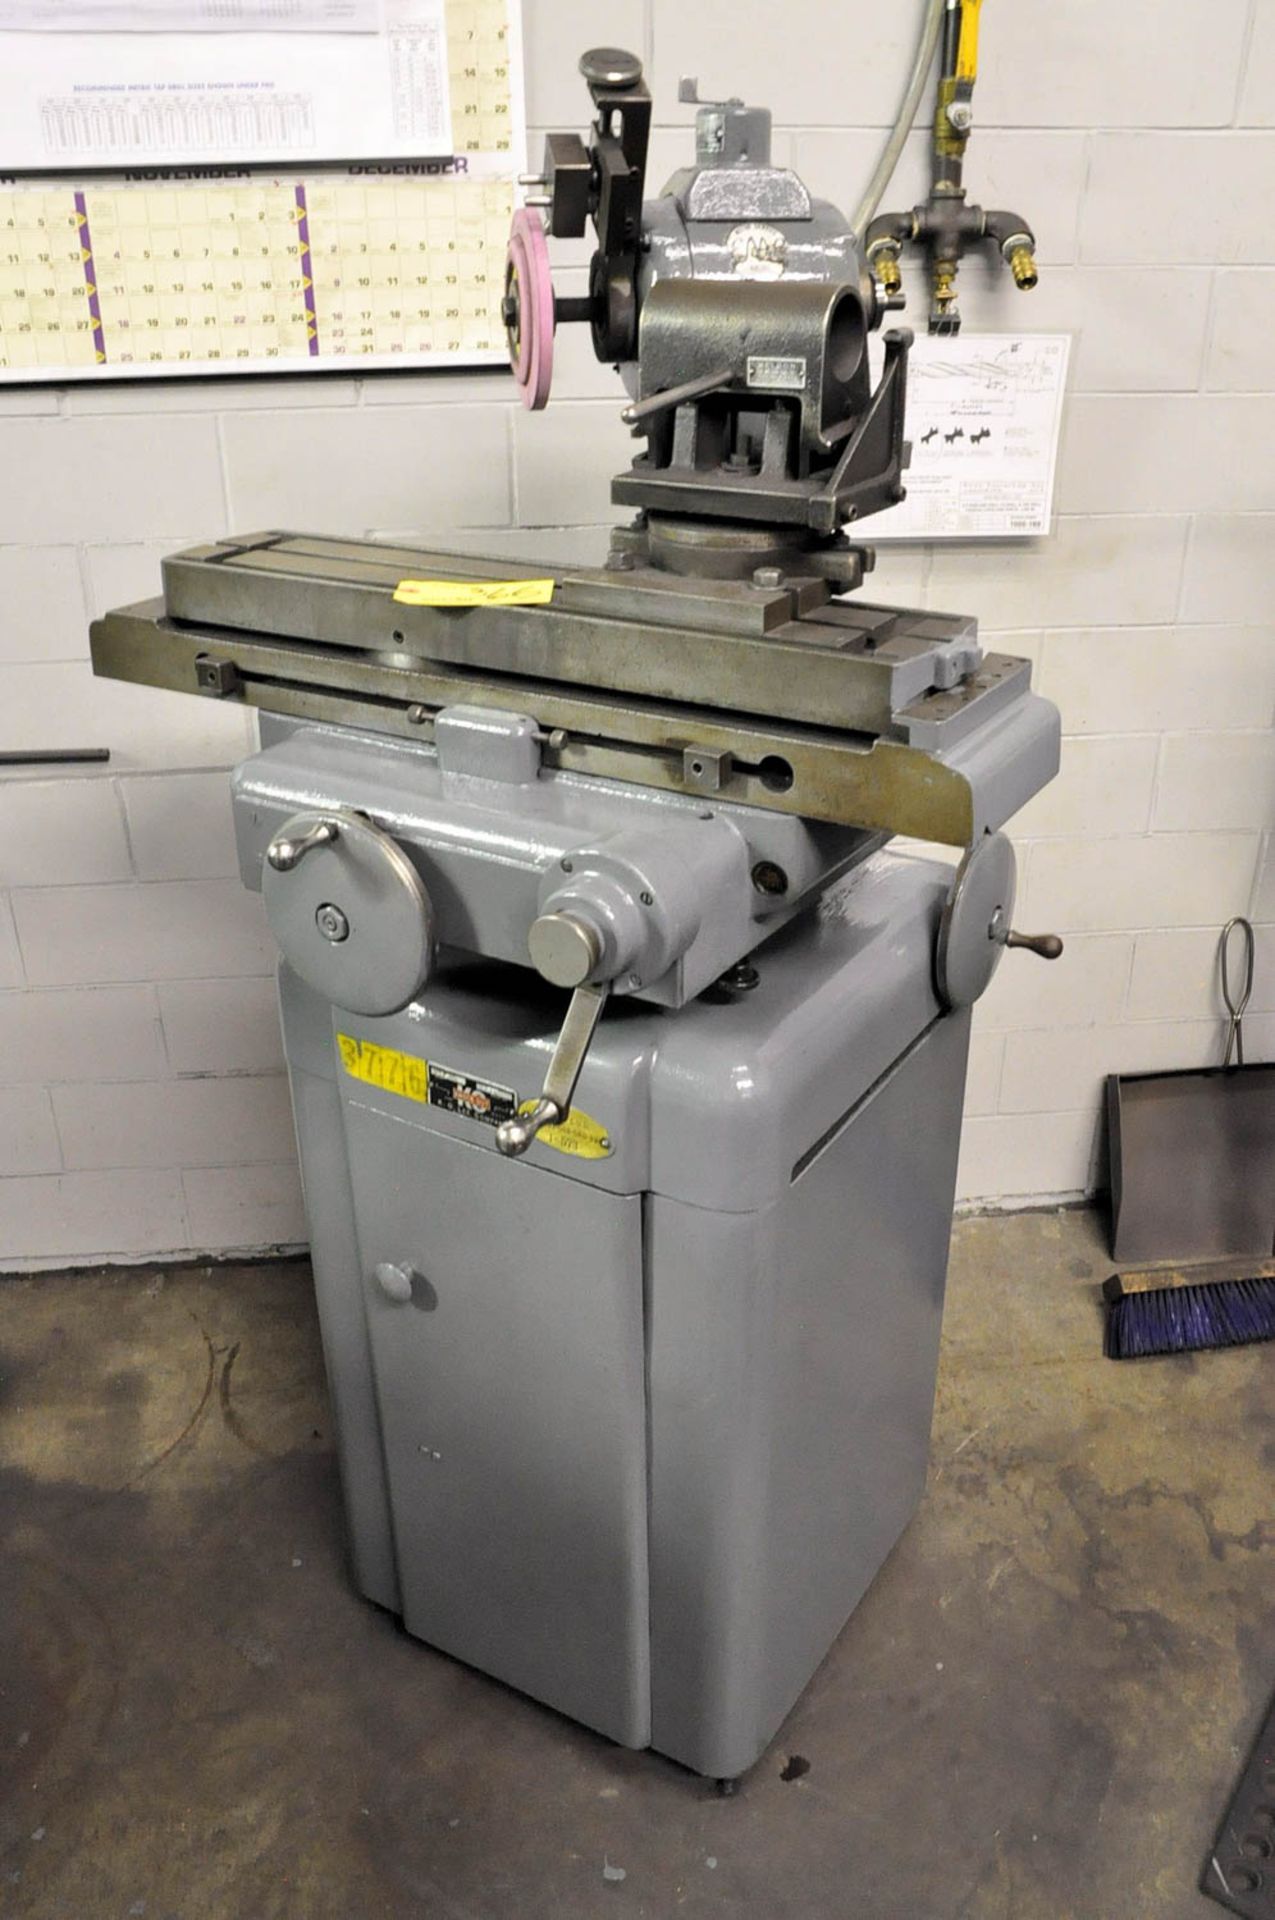 KO LEE MDL. B800-8-52, TOOL GRINDER, S/N: 4530, 5" X 24" T-SLOTTED WORK SURFACE, (#3776), (STOCK - Image 2 of 4